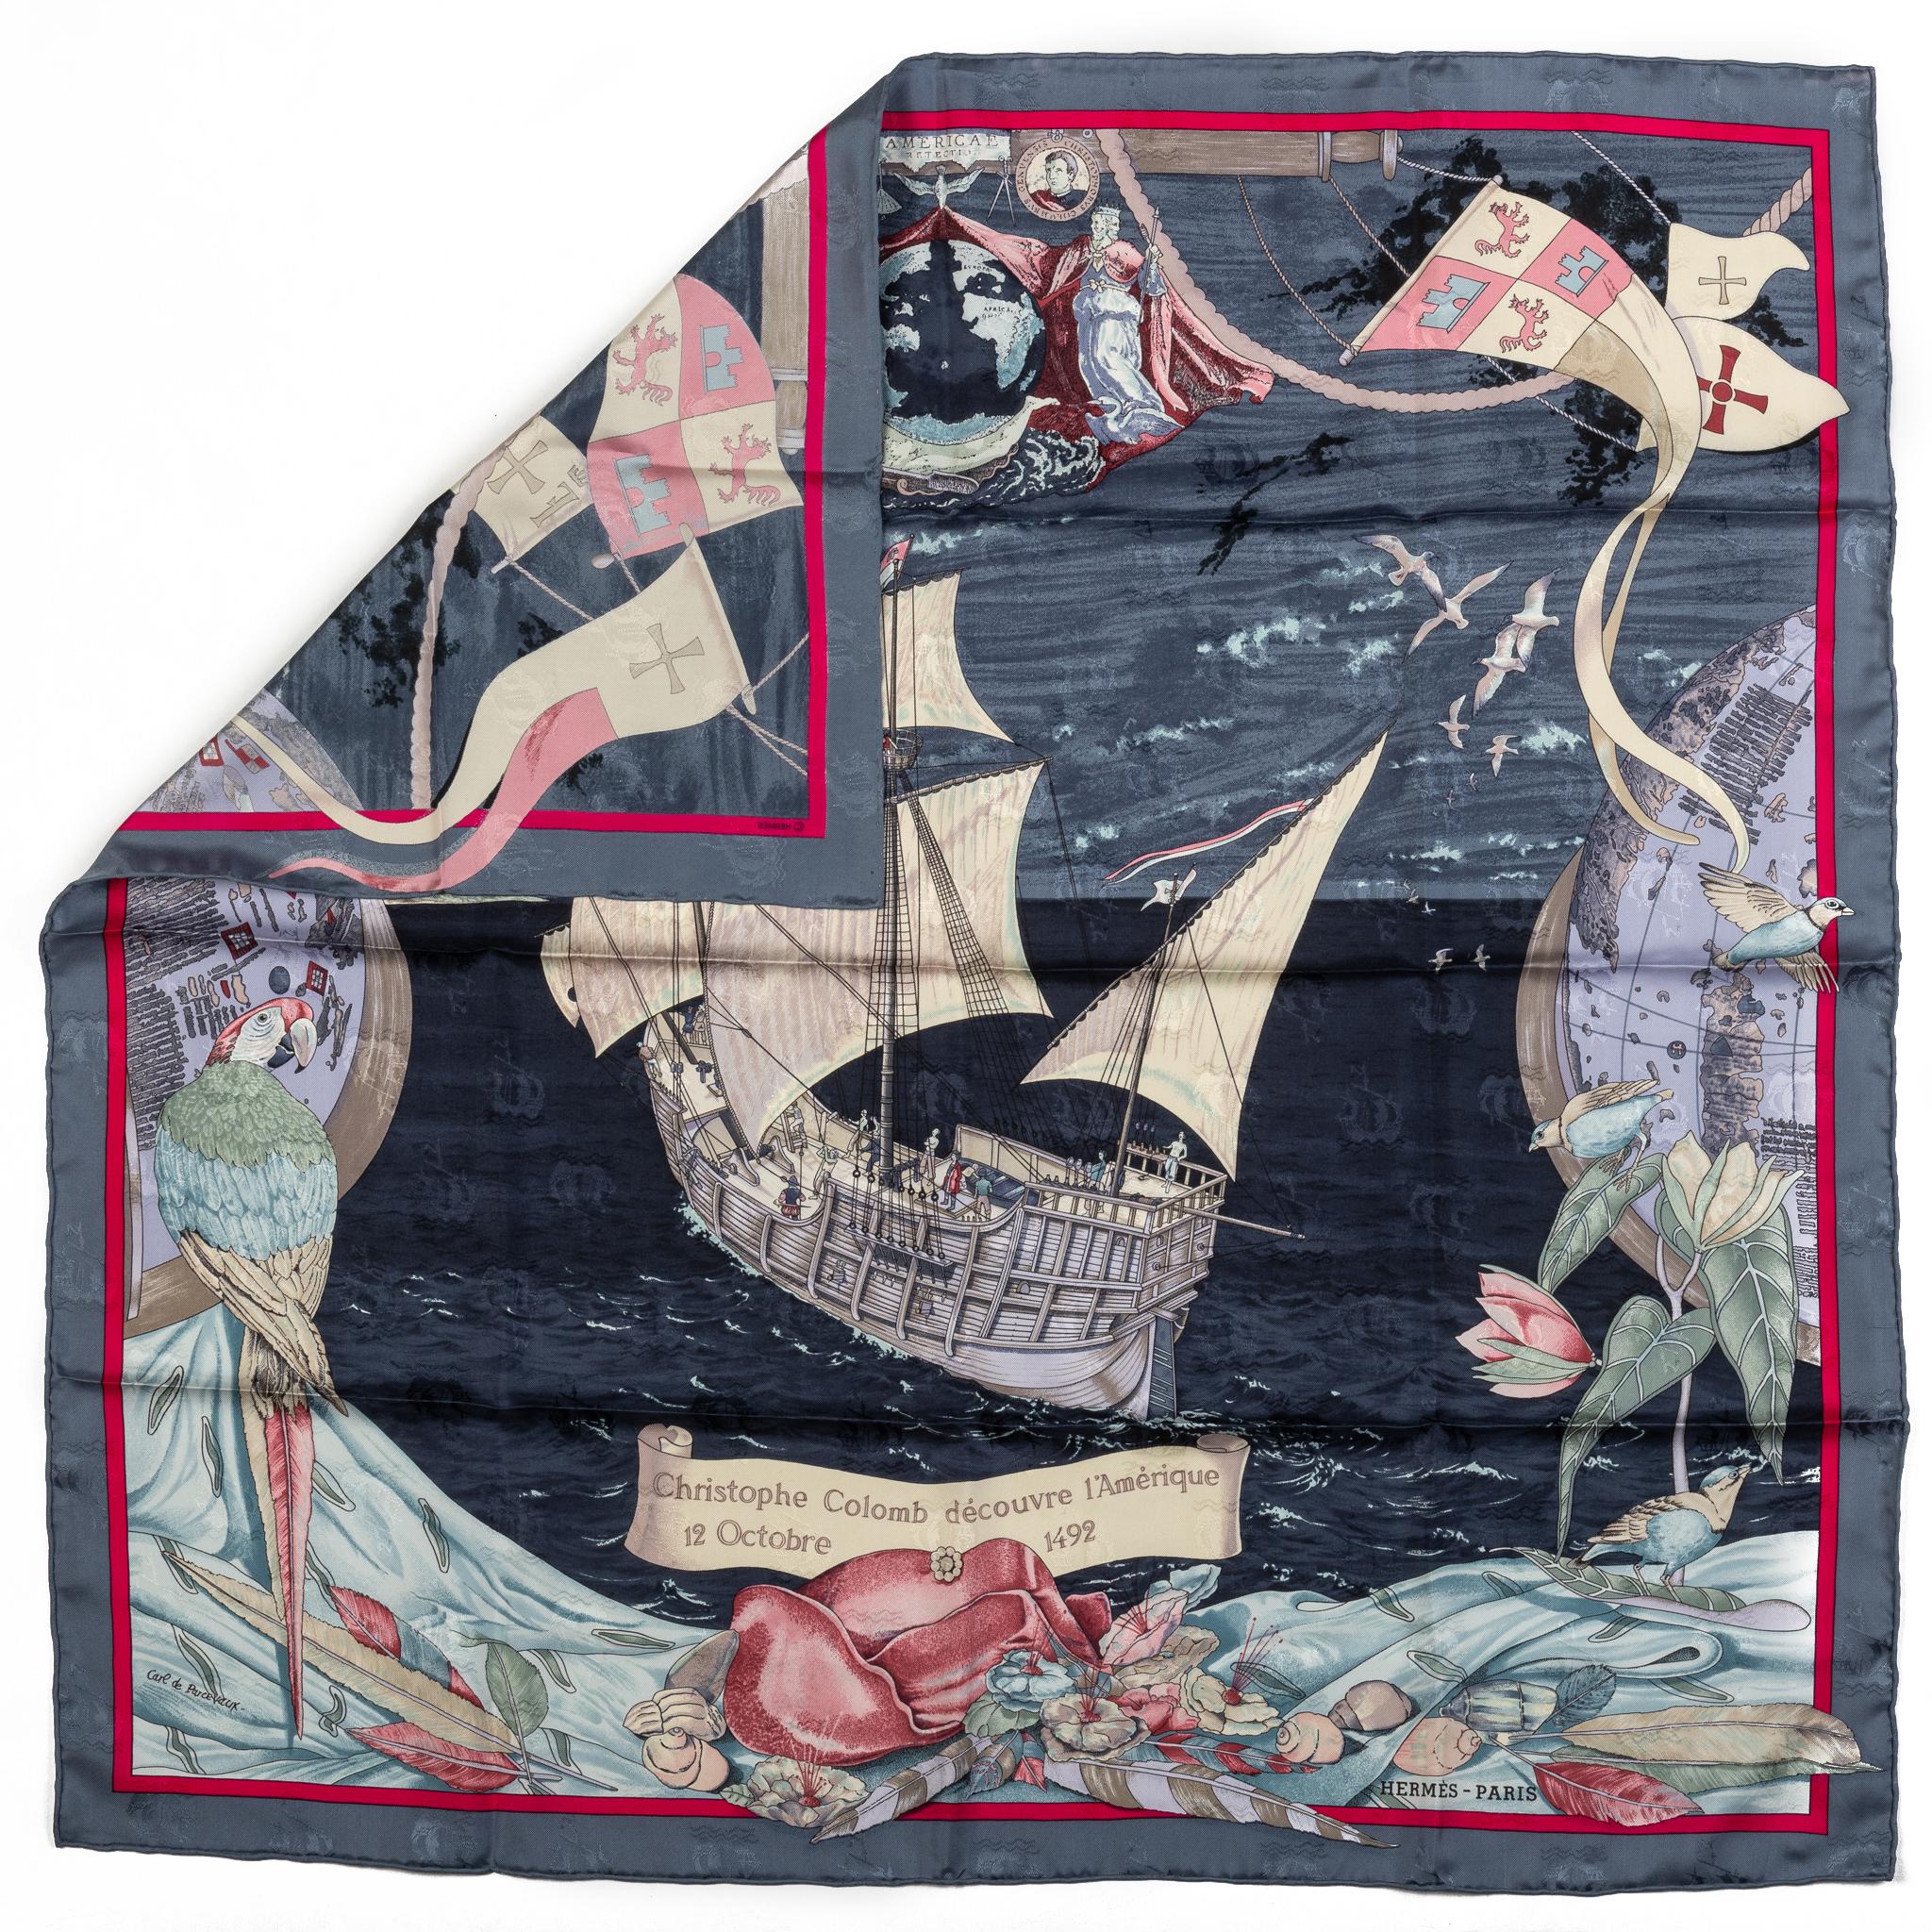 Hermes Colombe ship silk scarf in blue and gray. Hand rolled edges. No box included.